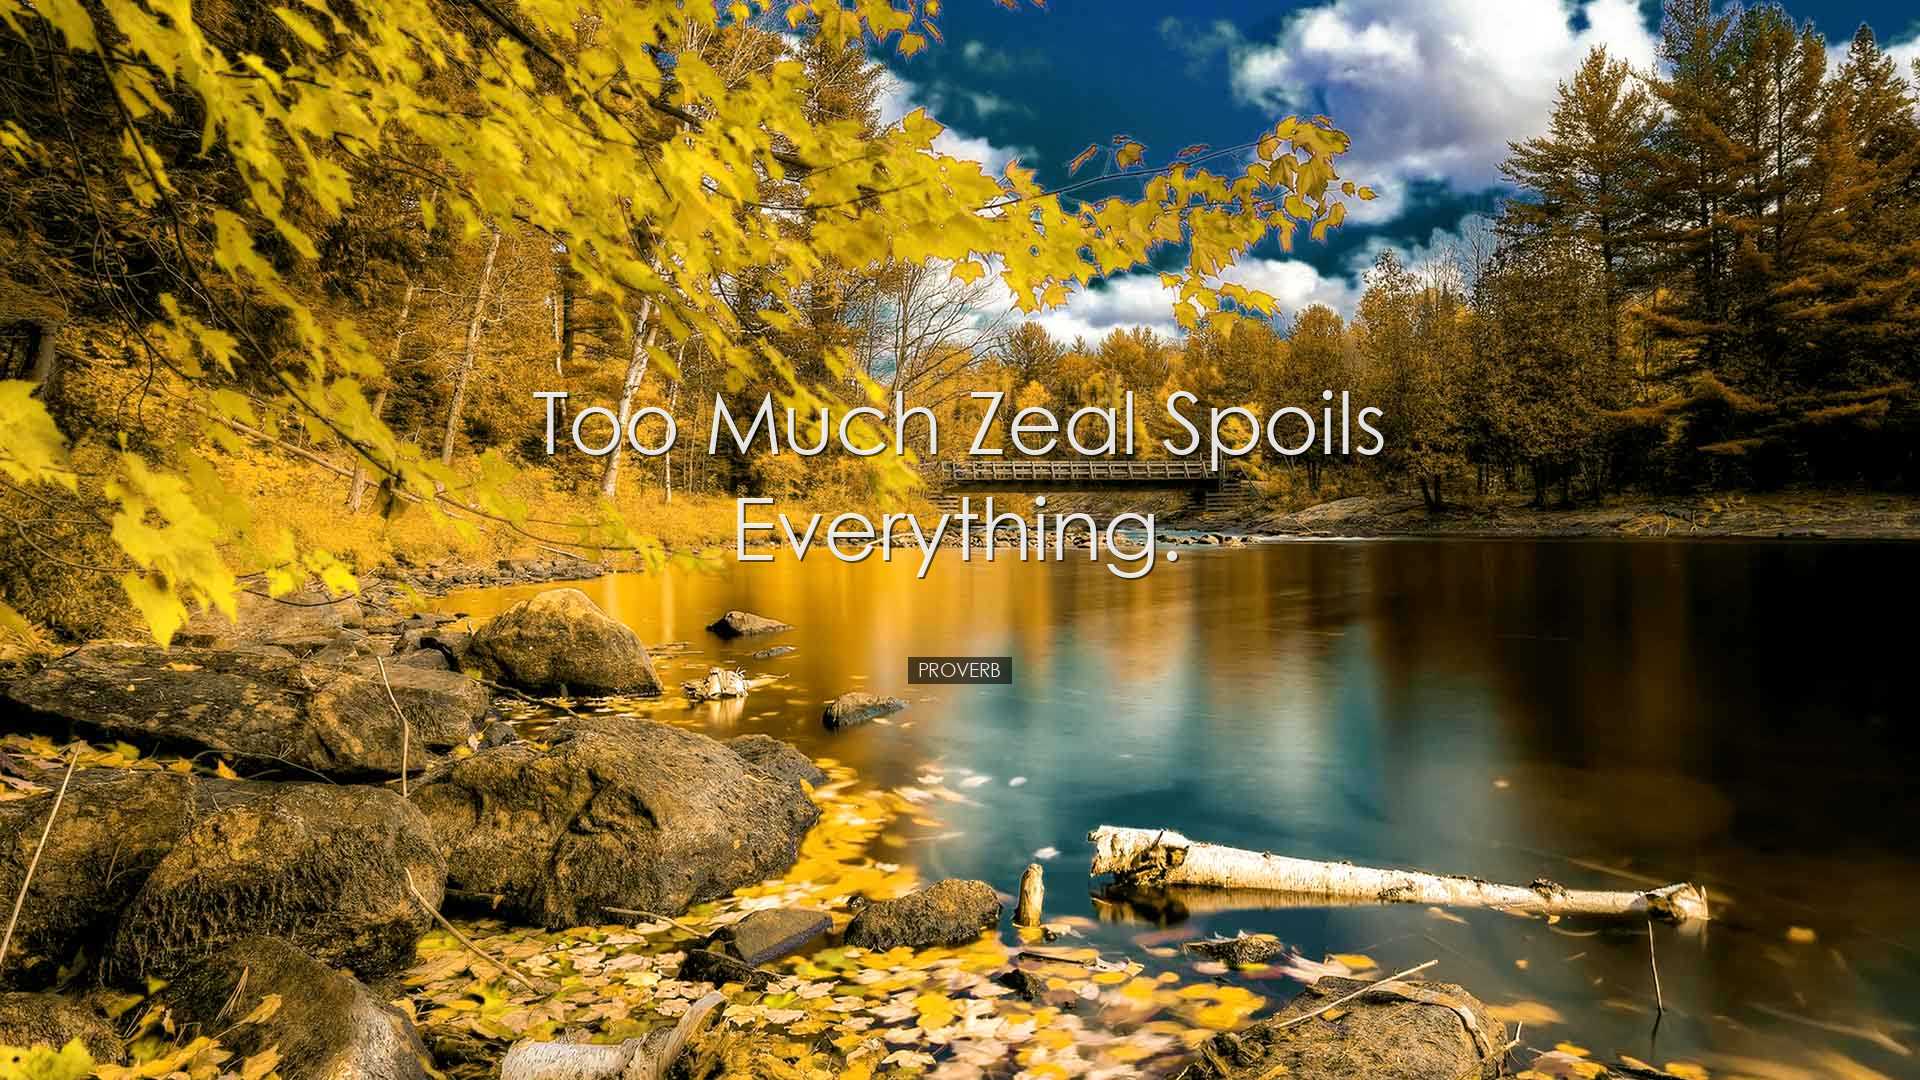 Too much zeal spoils everything. - Proverb